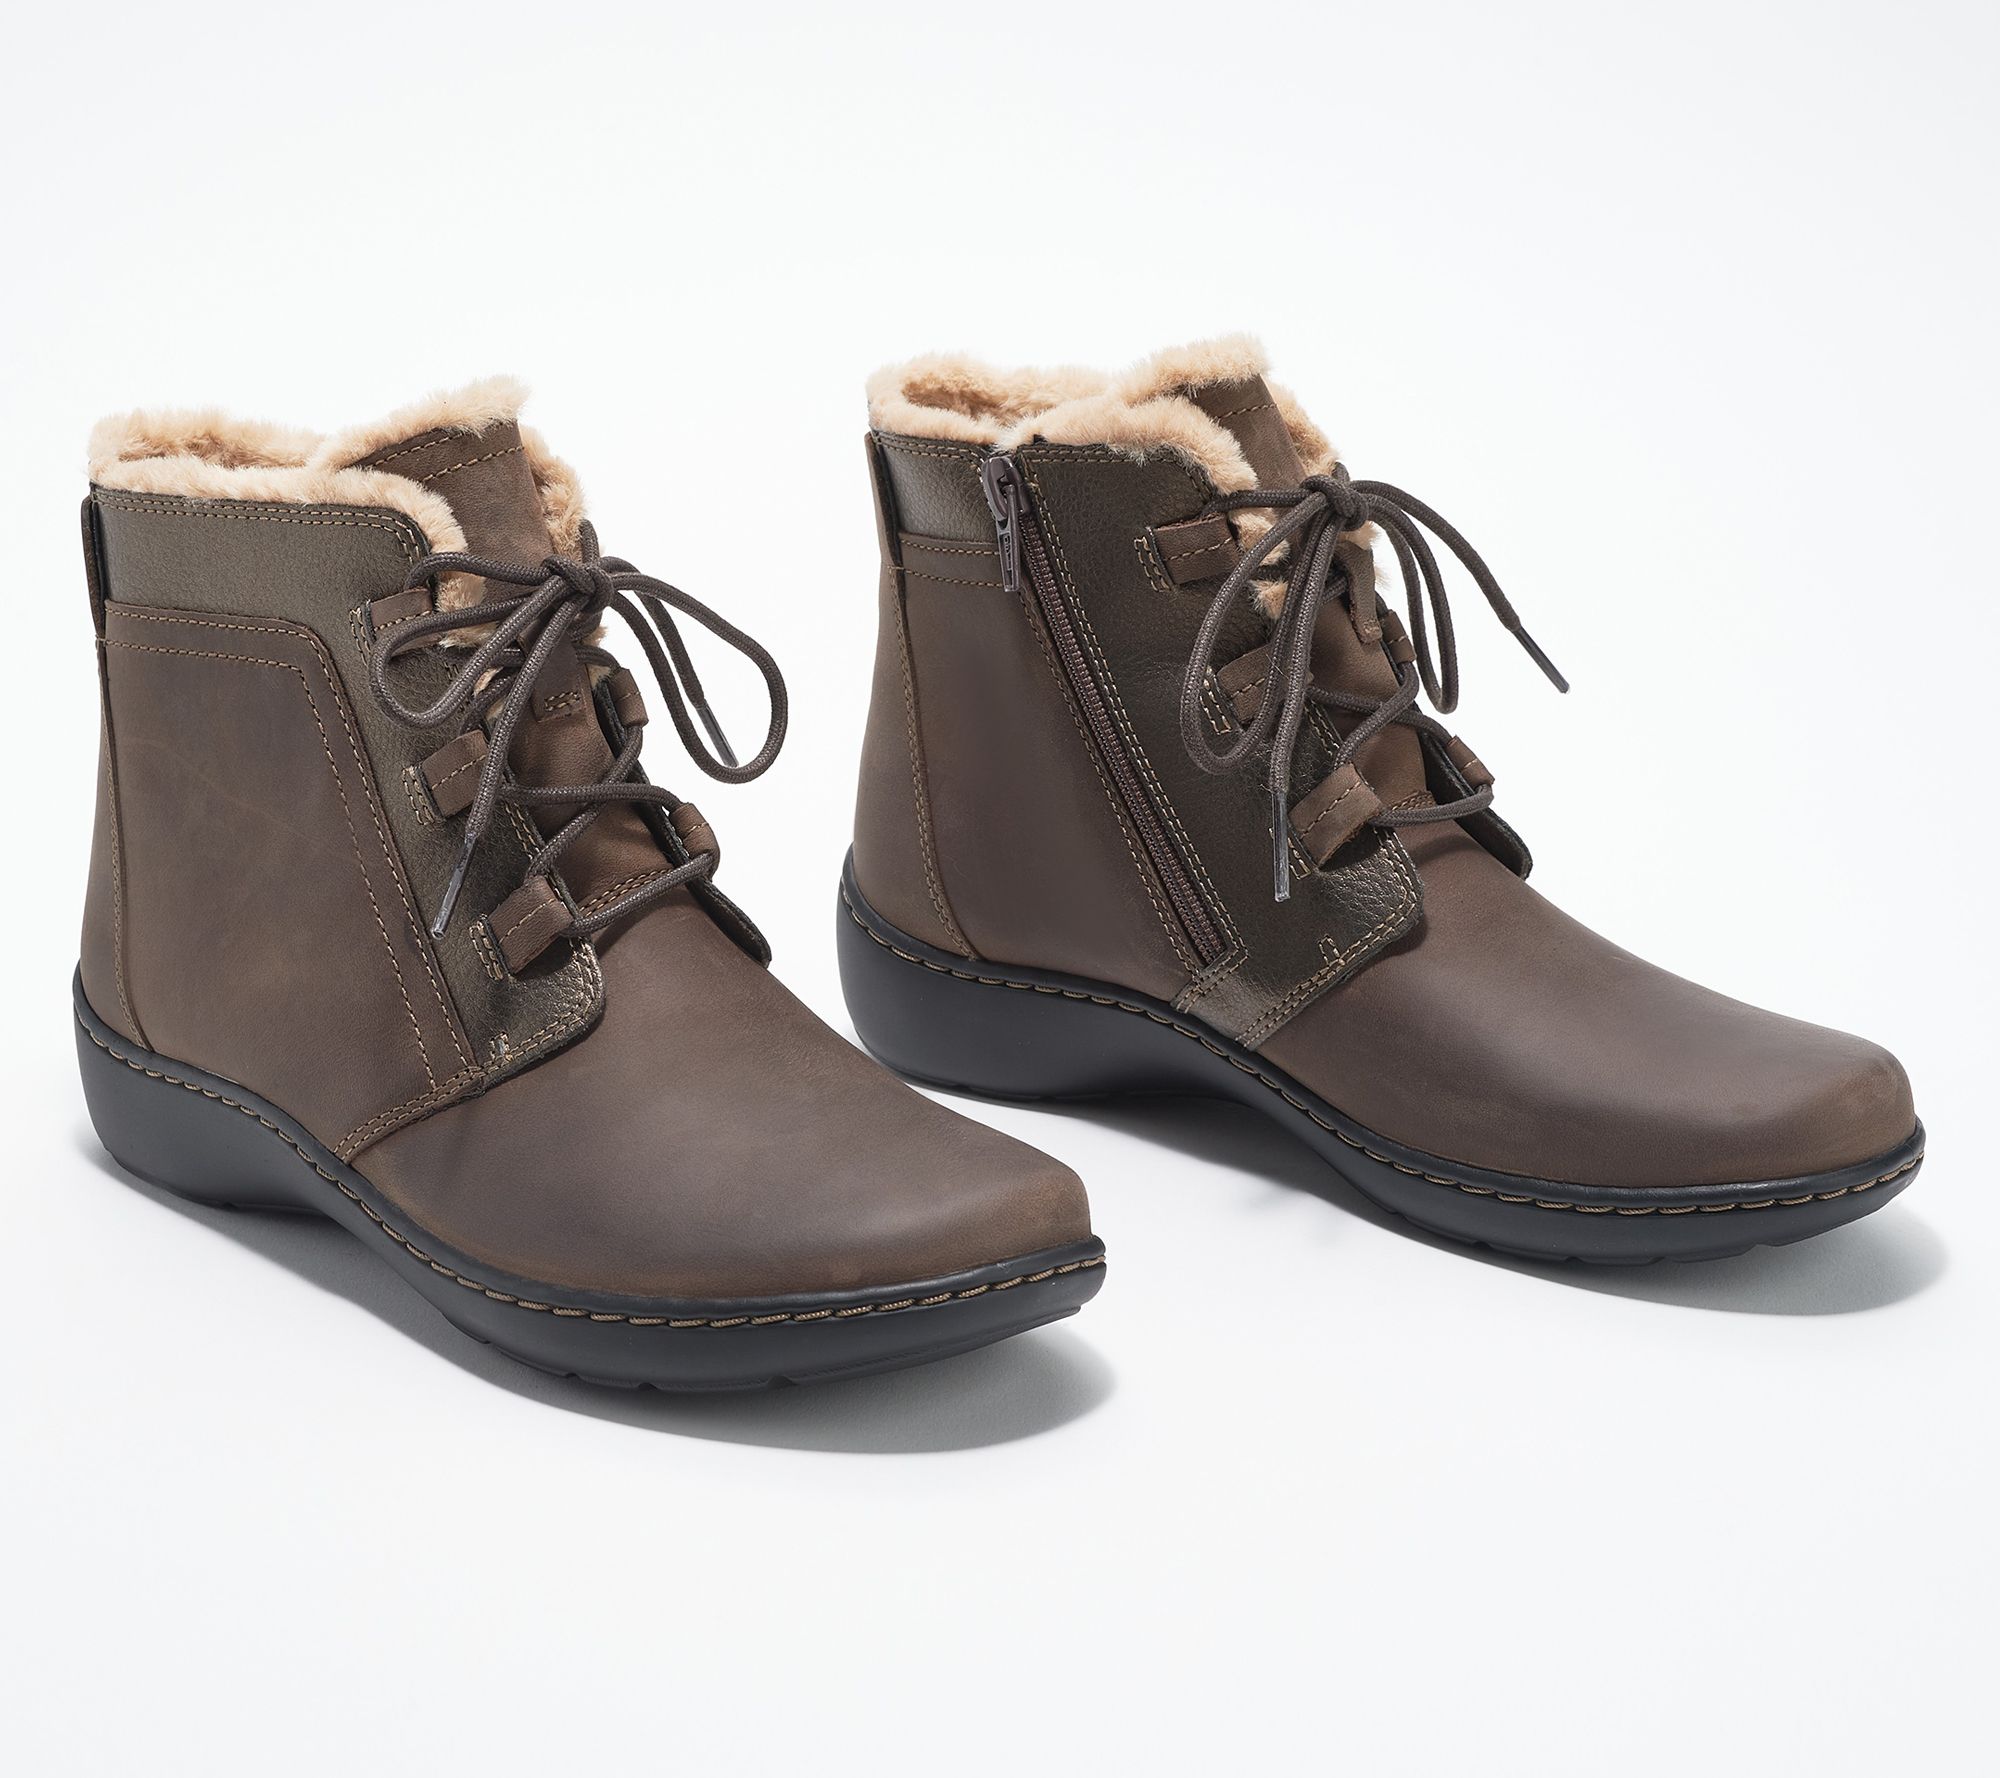 clarks leather water resistant ankle boots with faux fur